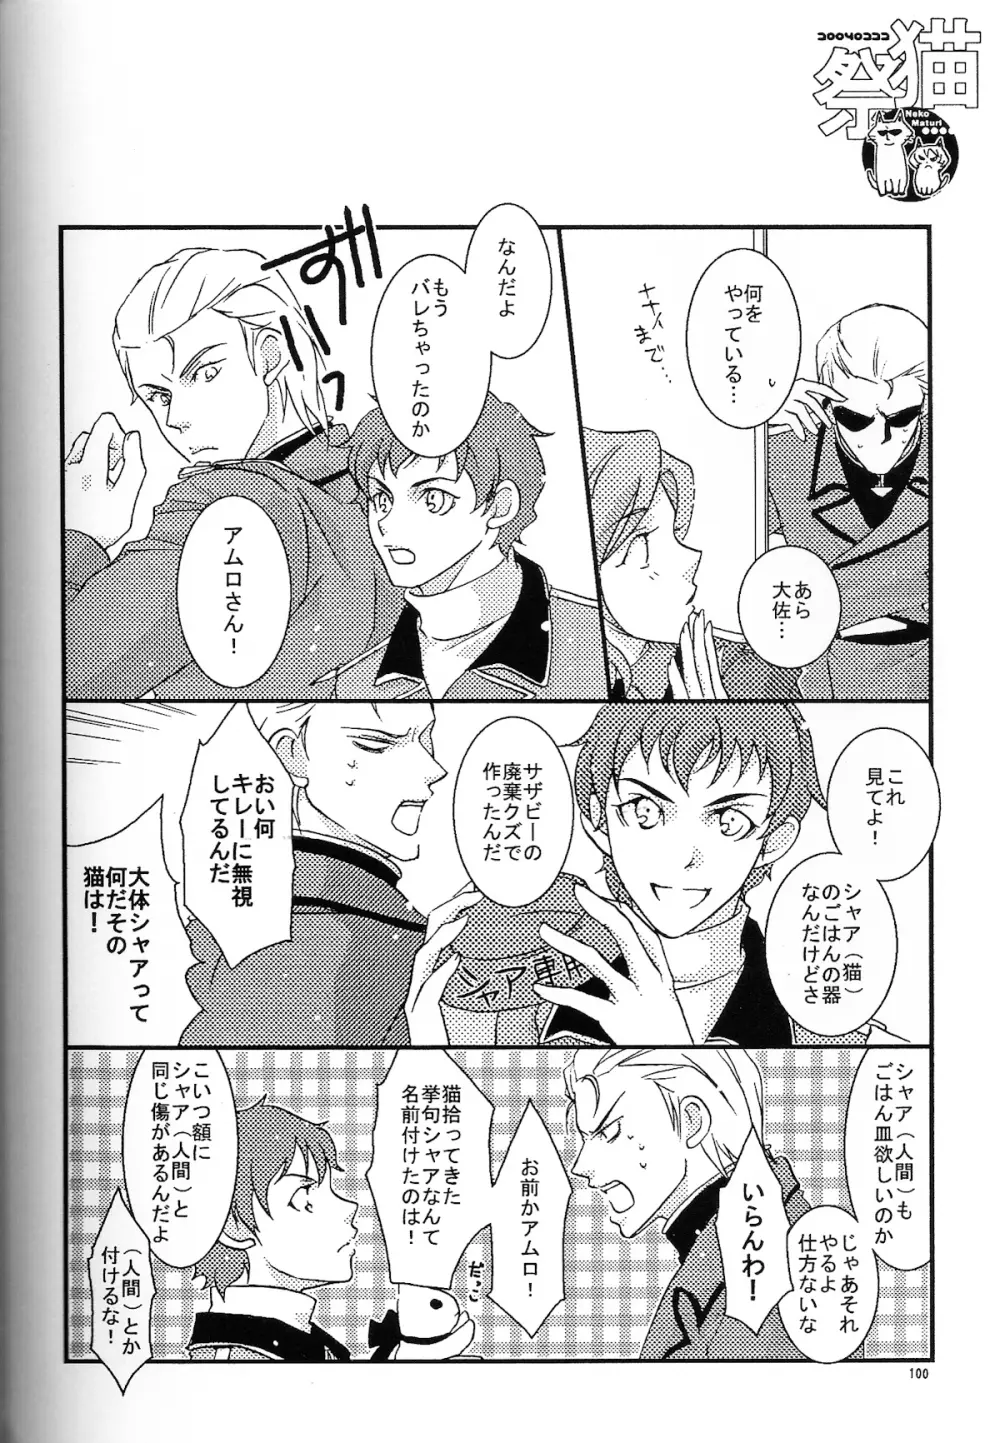 REPLAY 108 再録本 - page98